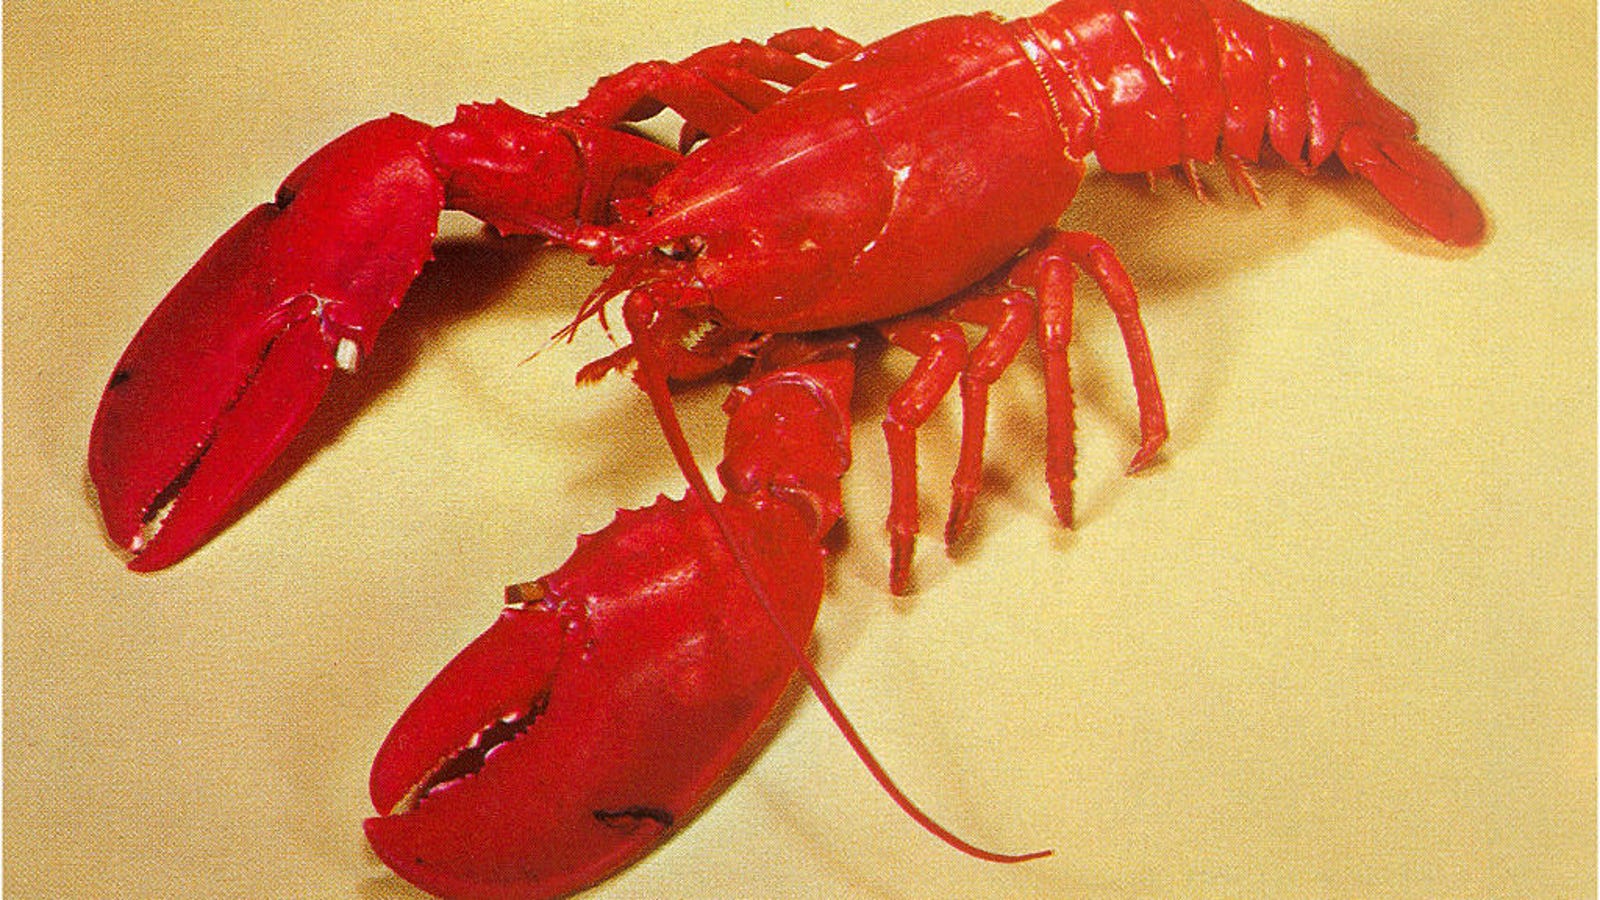 The Tsa Messed With The Wrong 20 Pound Lobster And Its Owner Is Pissed